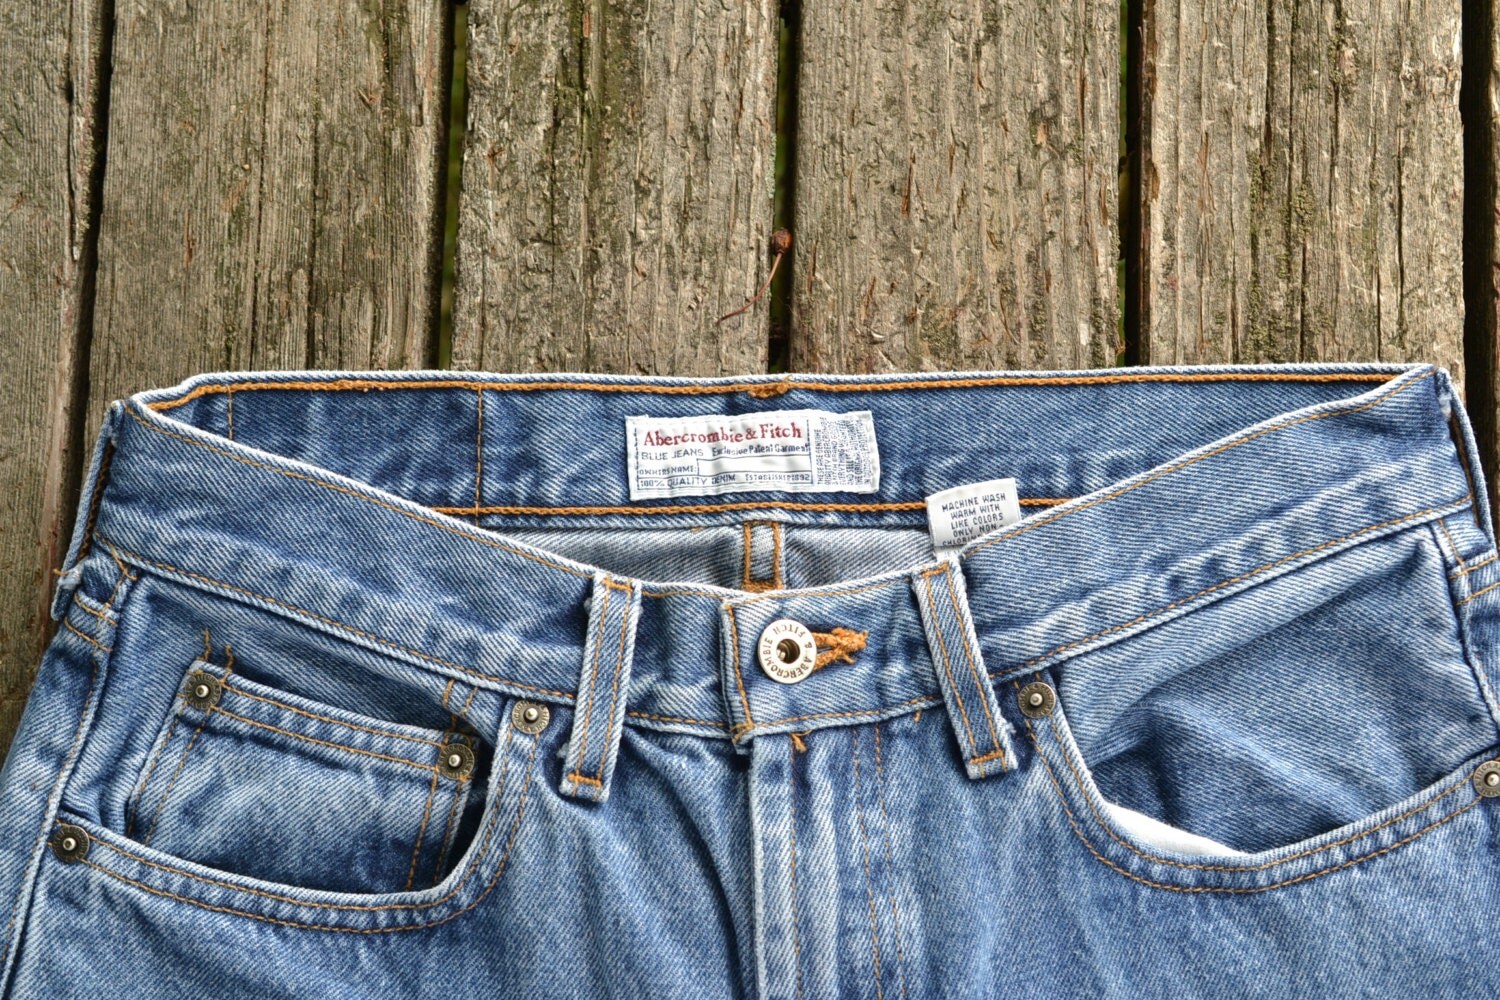 Abercrombie & Fitch 1990s High Waisted Denim by ApplePickerVintage